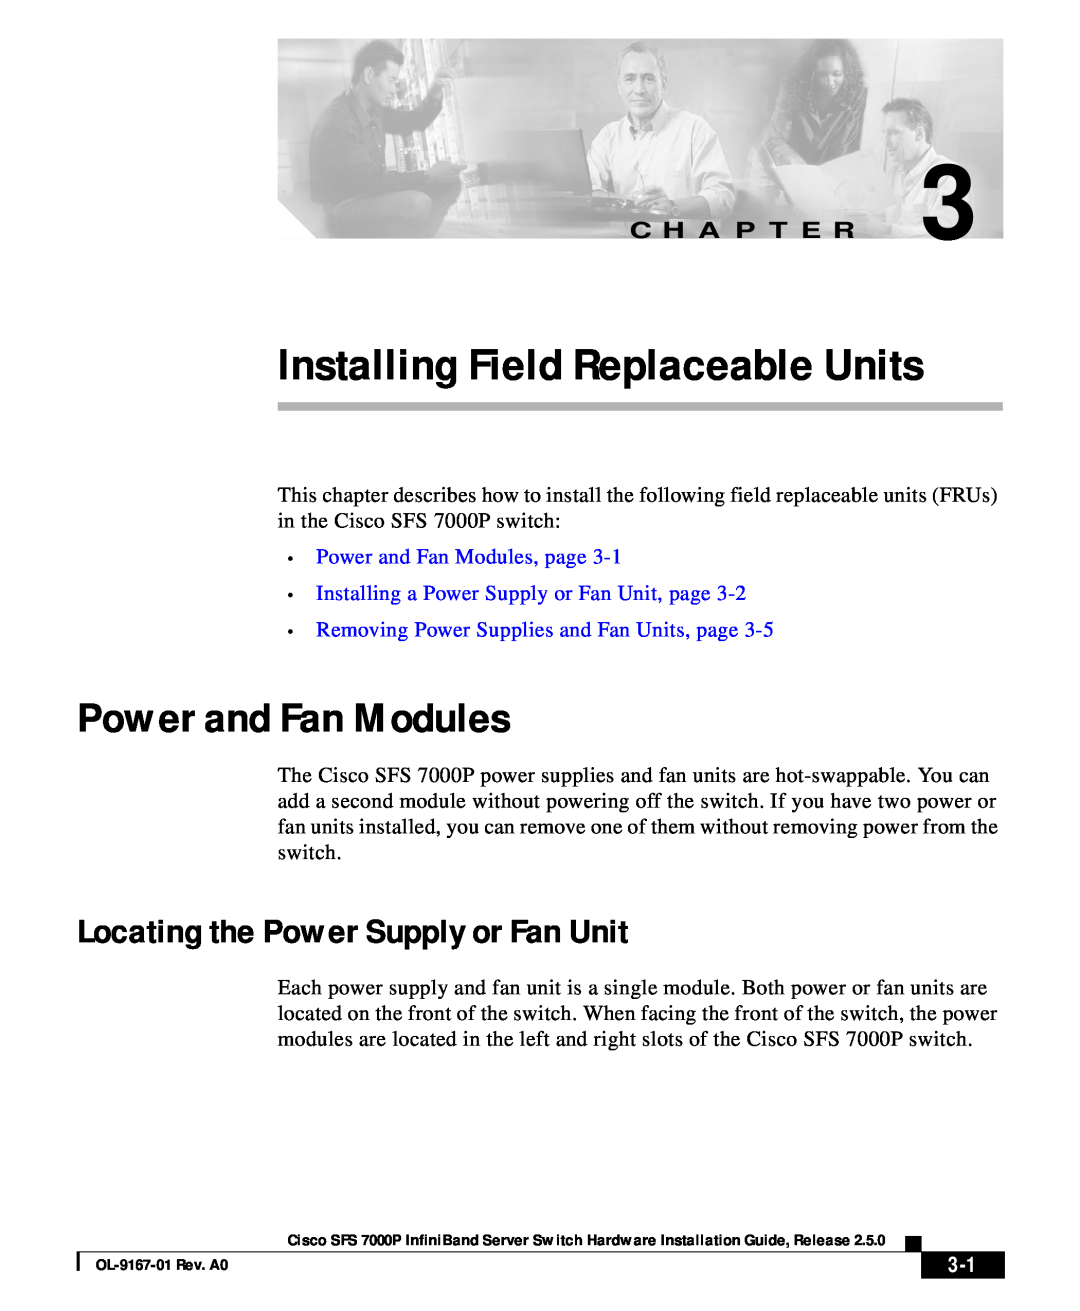 Cisco Systems SFS 7000P manual Locating the Power Supply or Fan Unit, Power and Fan Modules, page, C H A P T E R 